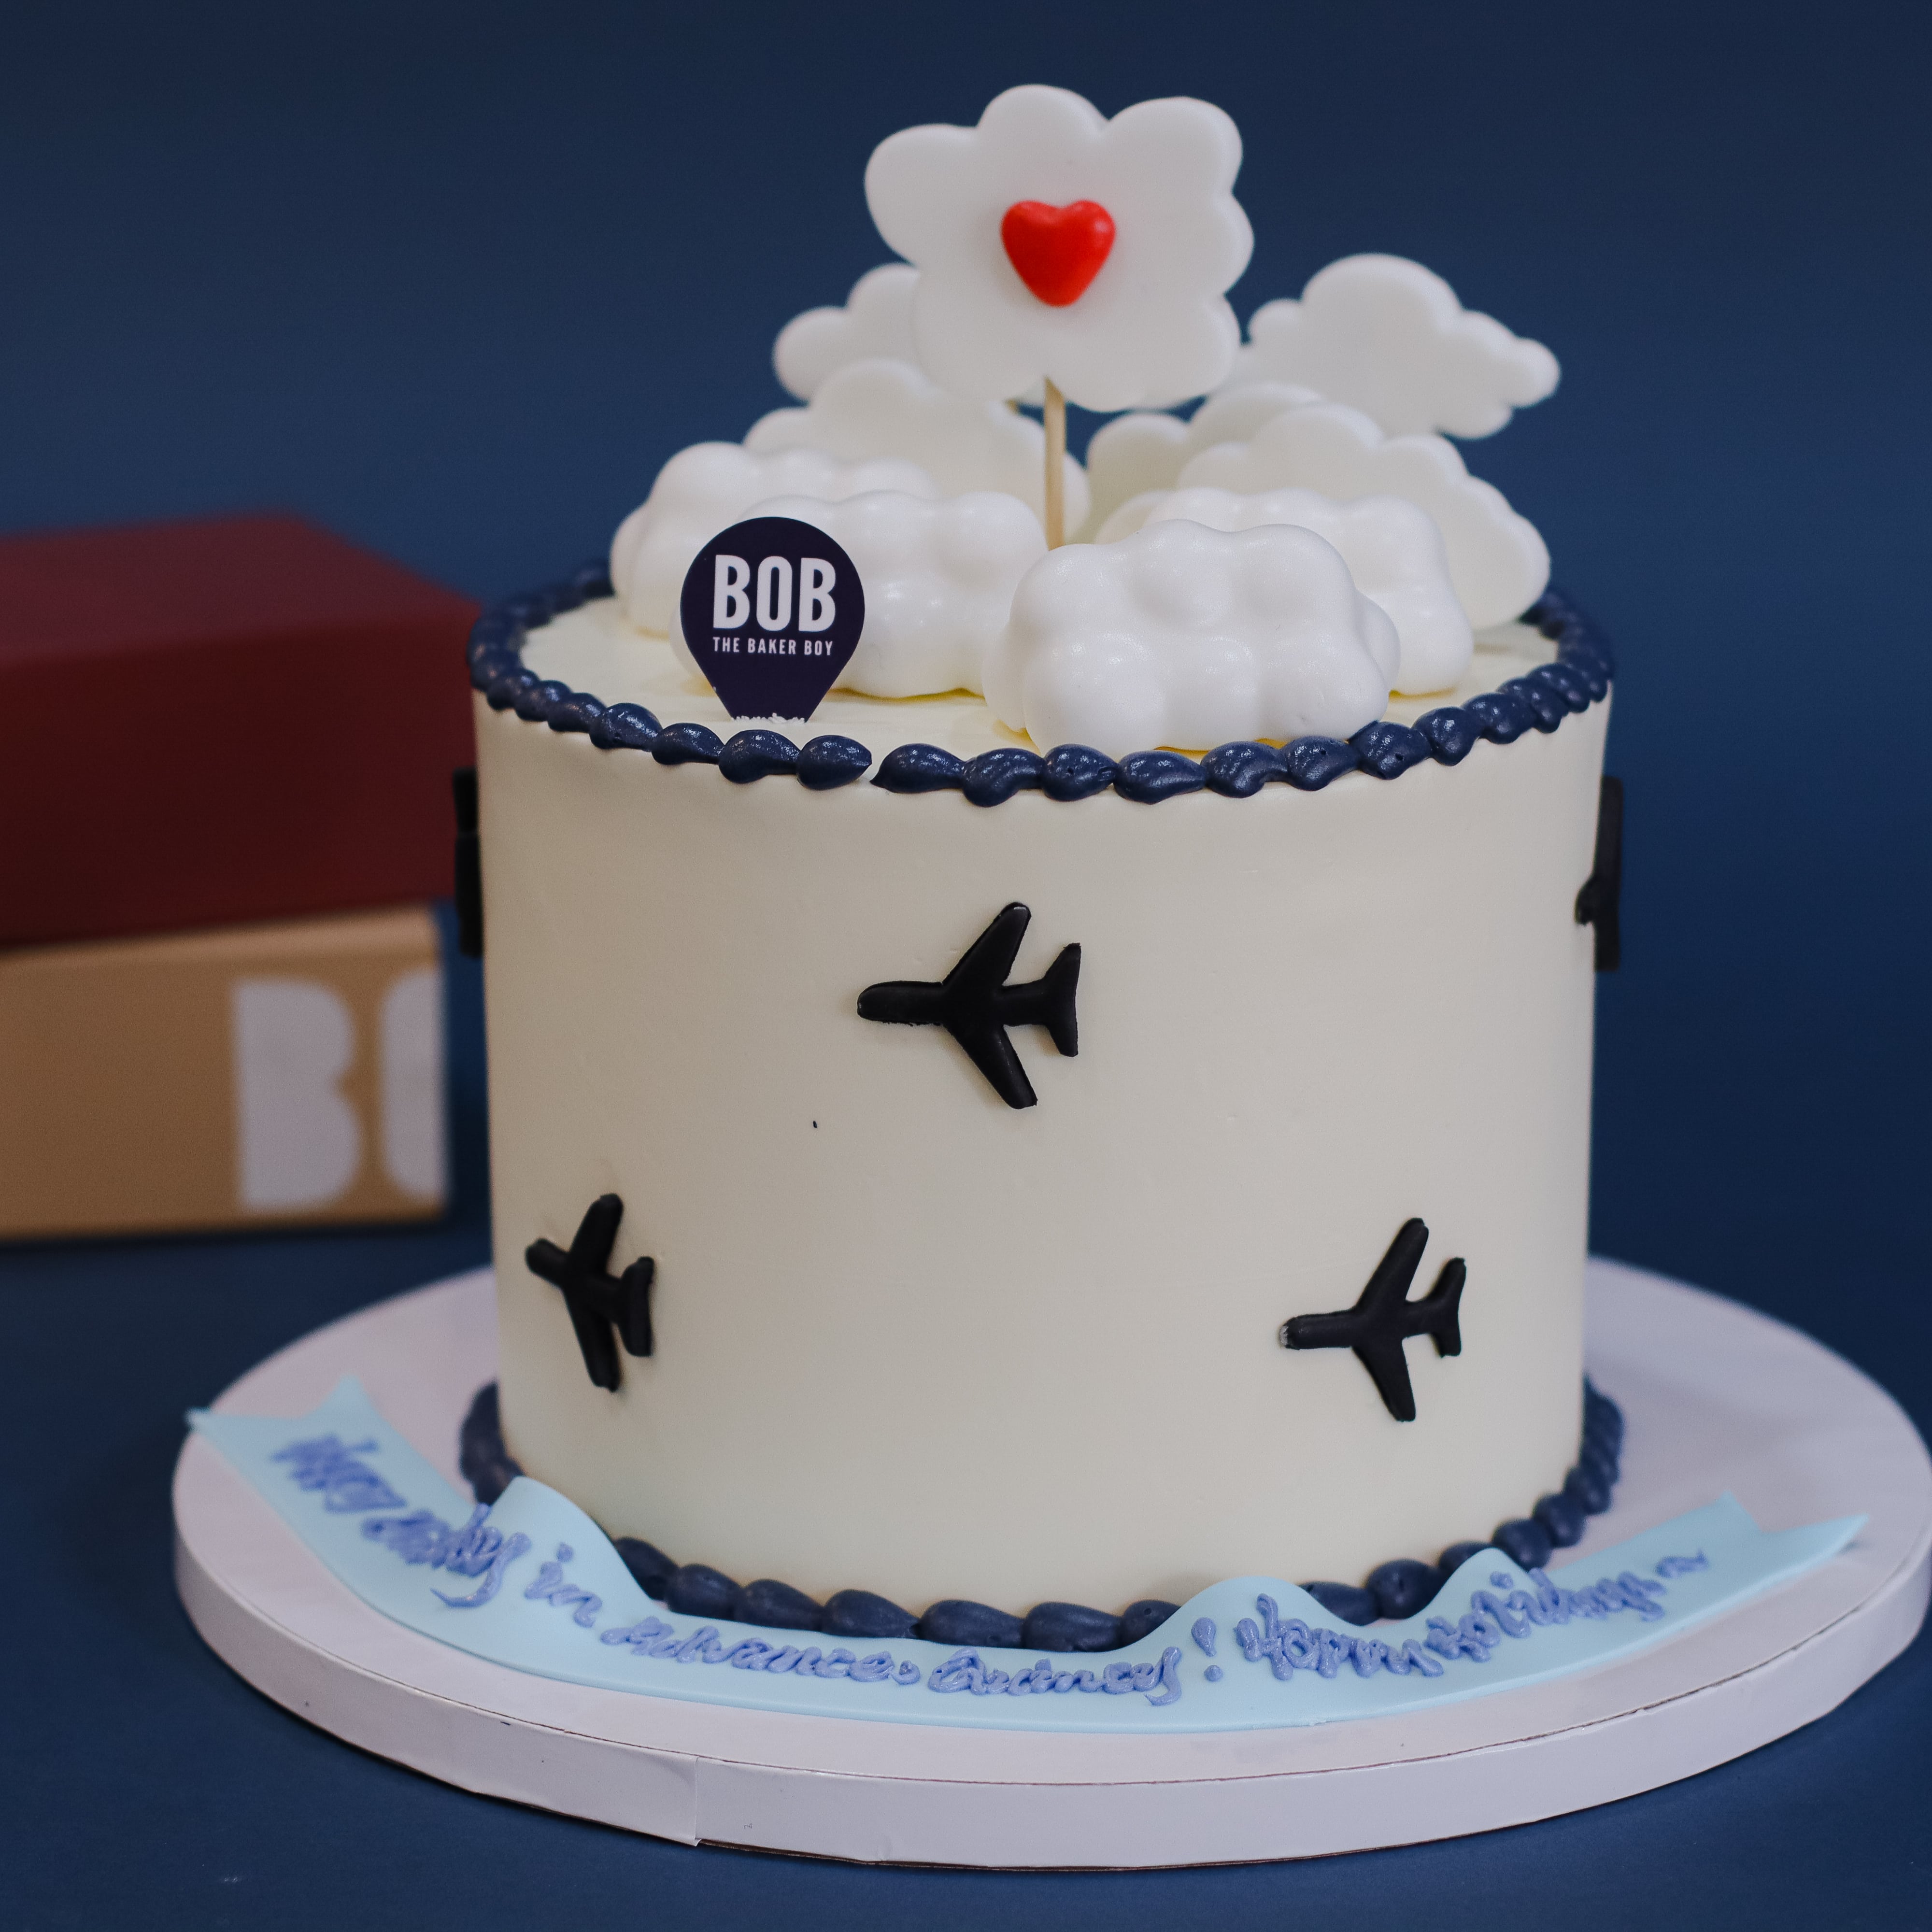 Pilot Themed Cake with Air Plane Silhouette